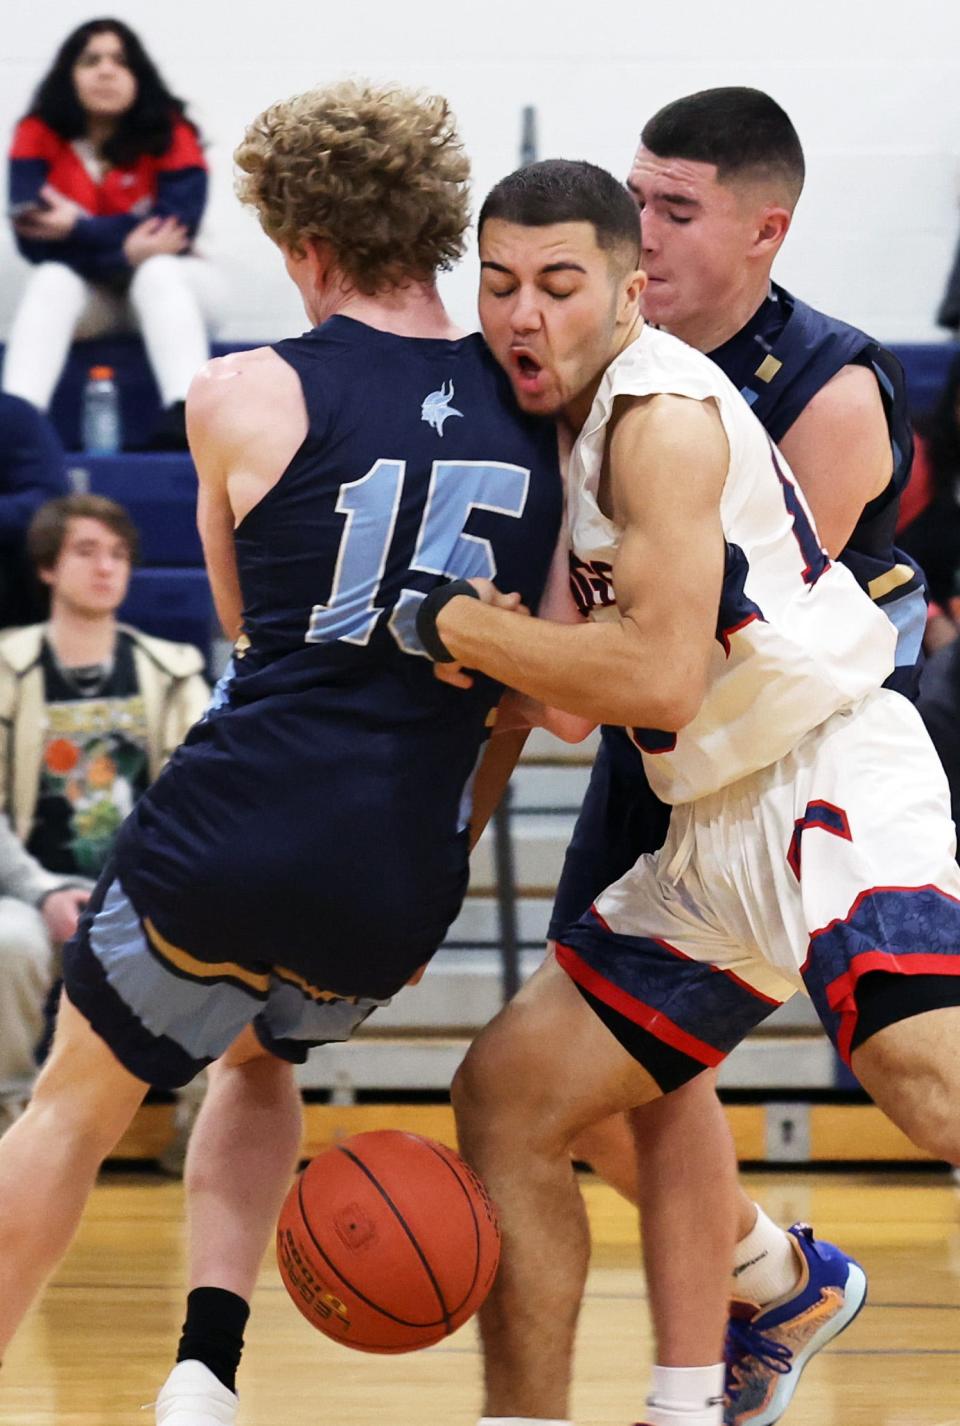 Rockland's Jordan DePina, right, collides with East Bridgewater defender Aidan Toomey during a game on Tuesday, Jan. 17, 2023.